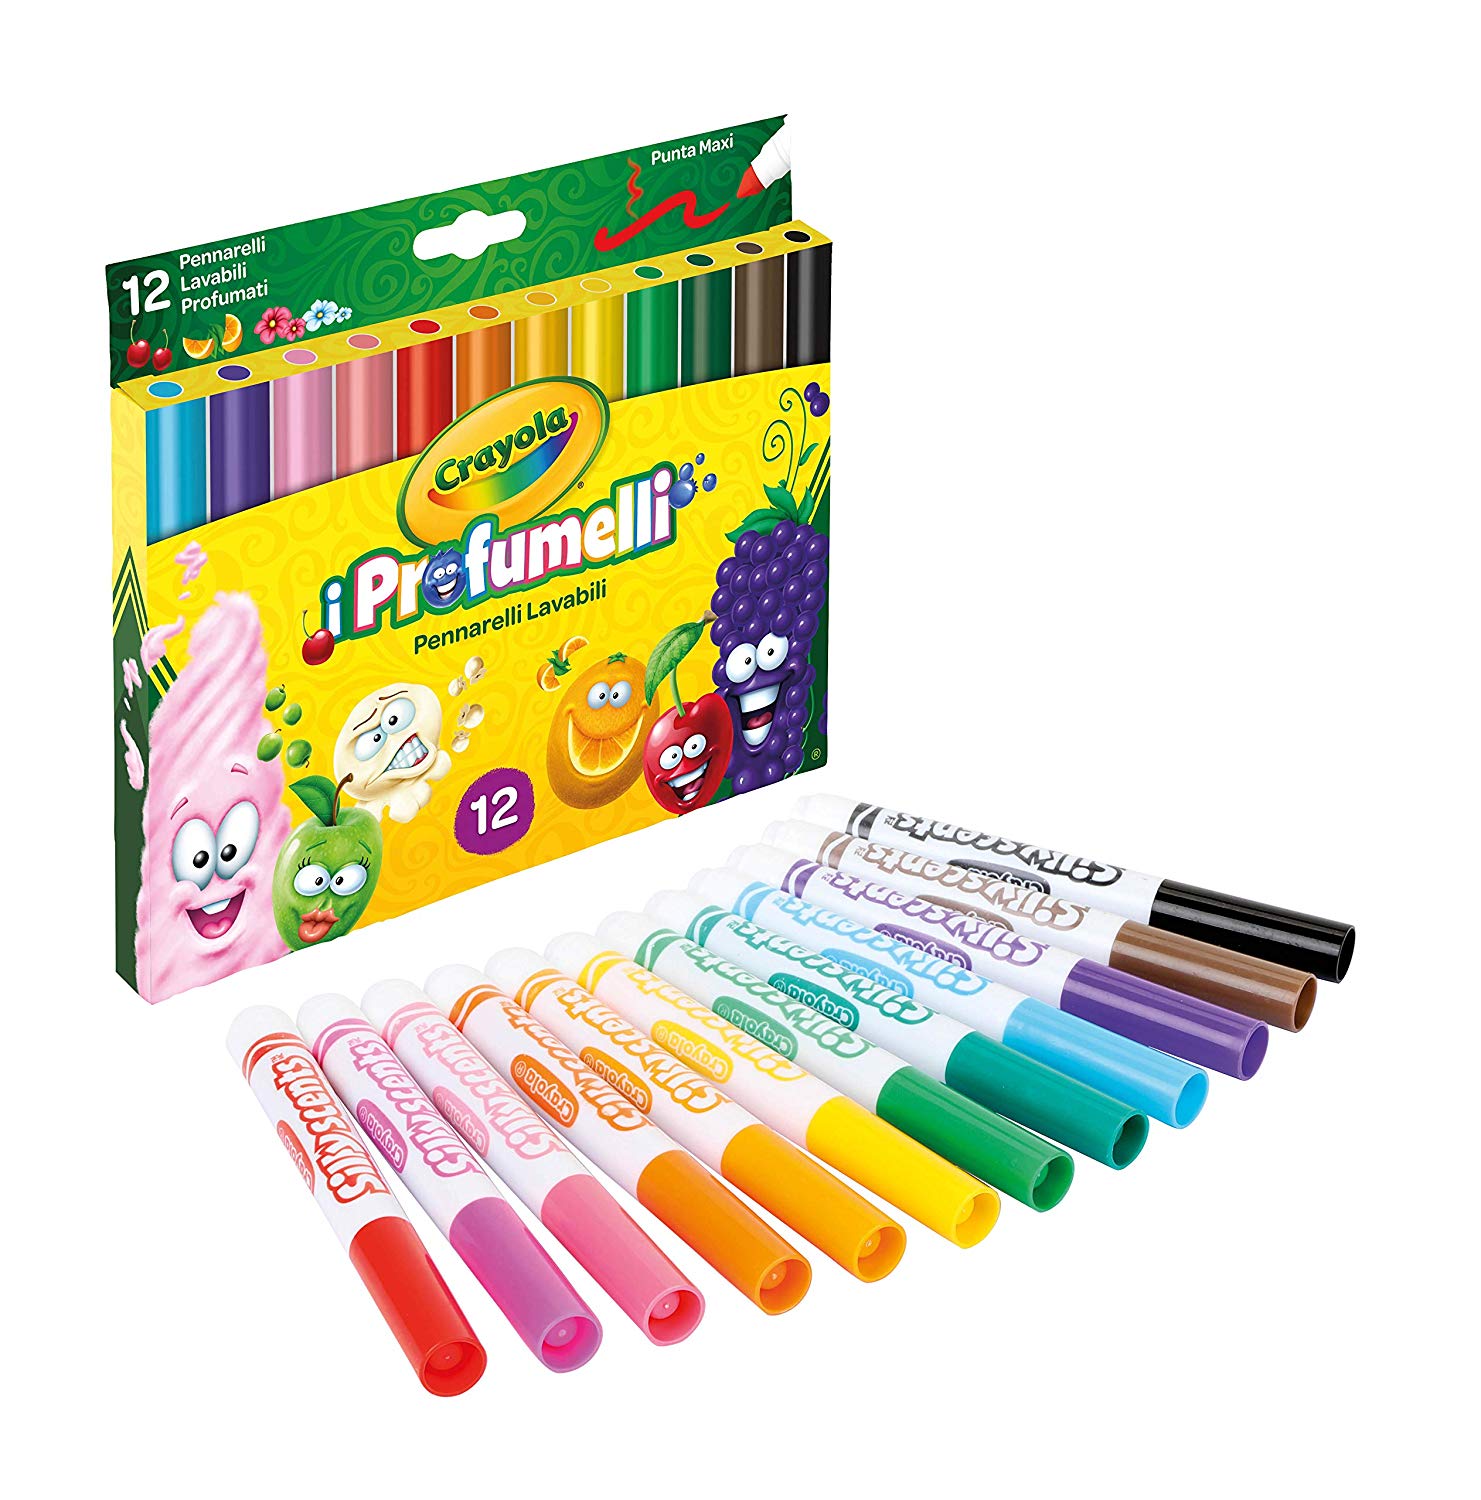 Make Your Own Silly Scented Markers With This Crayola Set - The Toy Insider